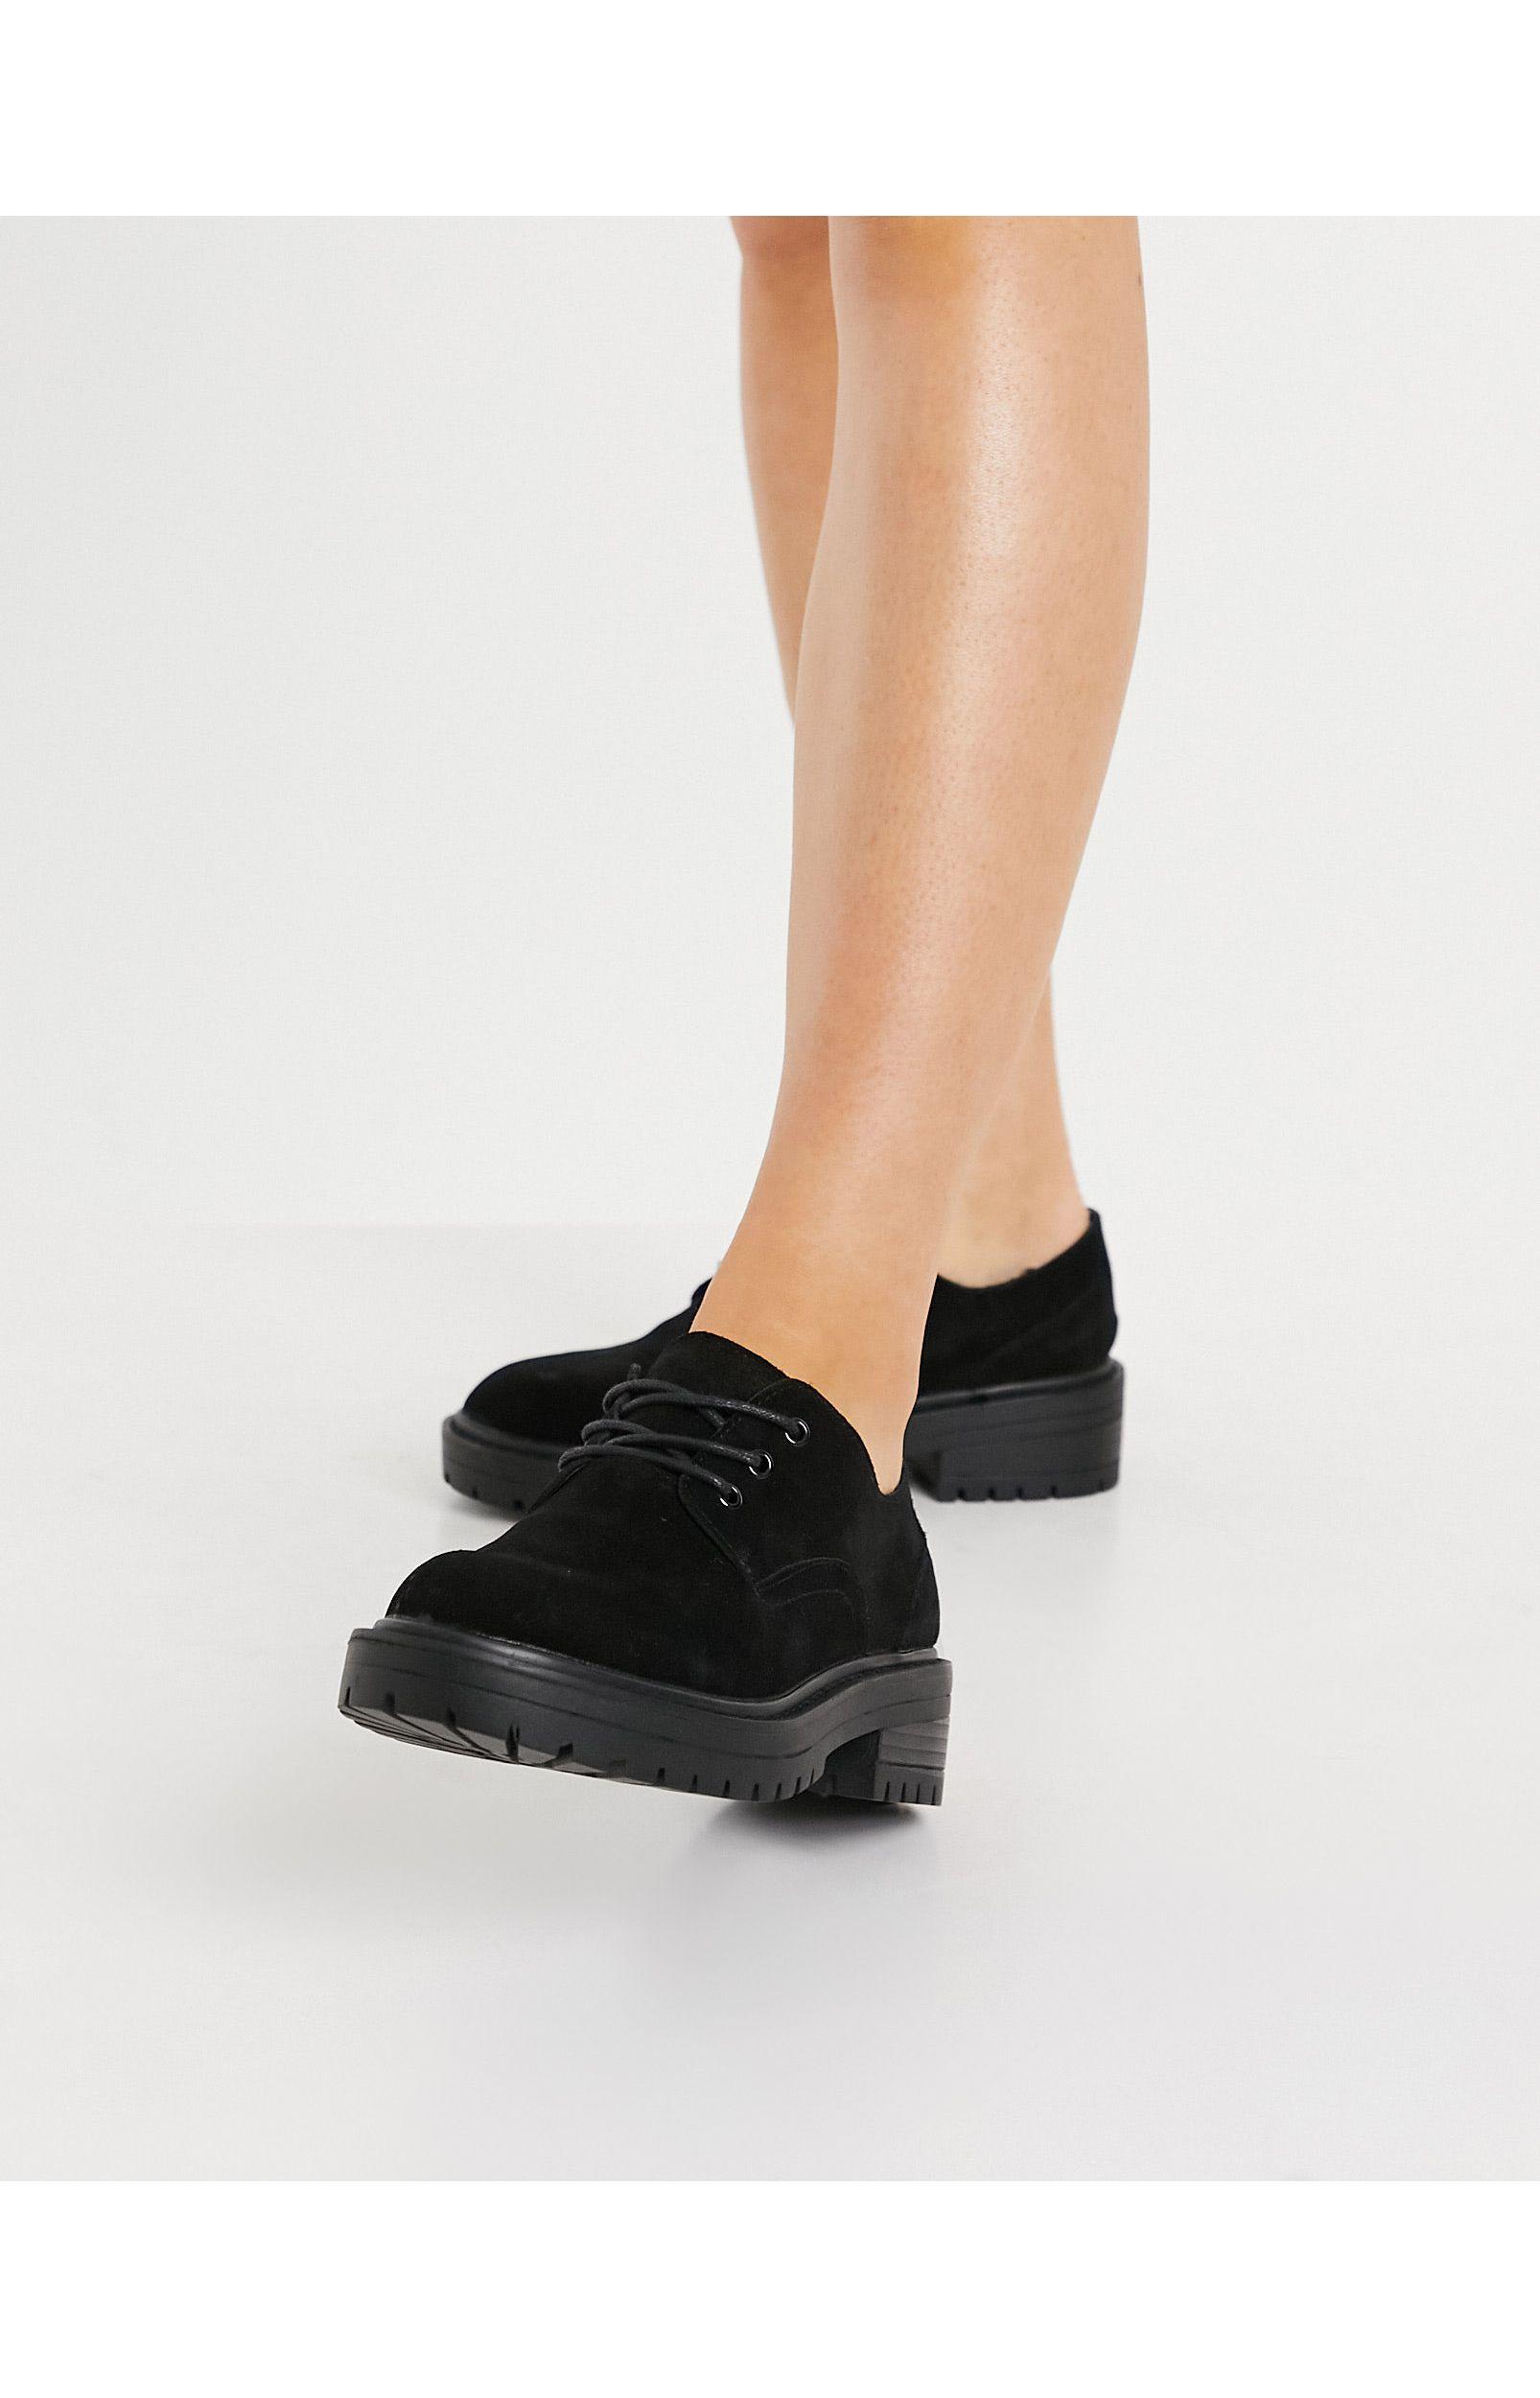 TOPSHOP Suede Lace Up Shoes in Black | Lyst